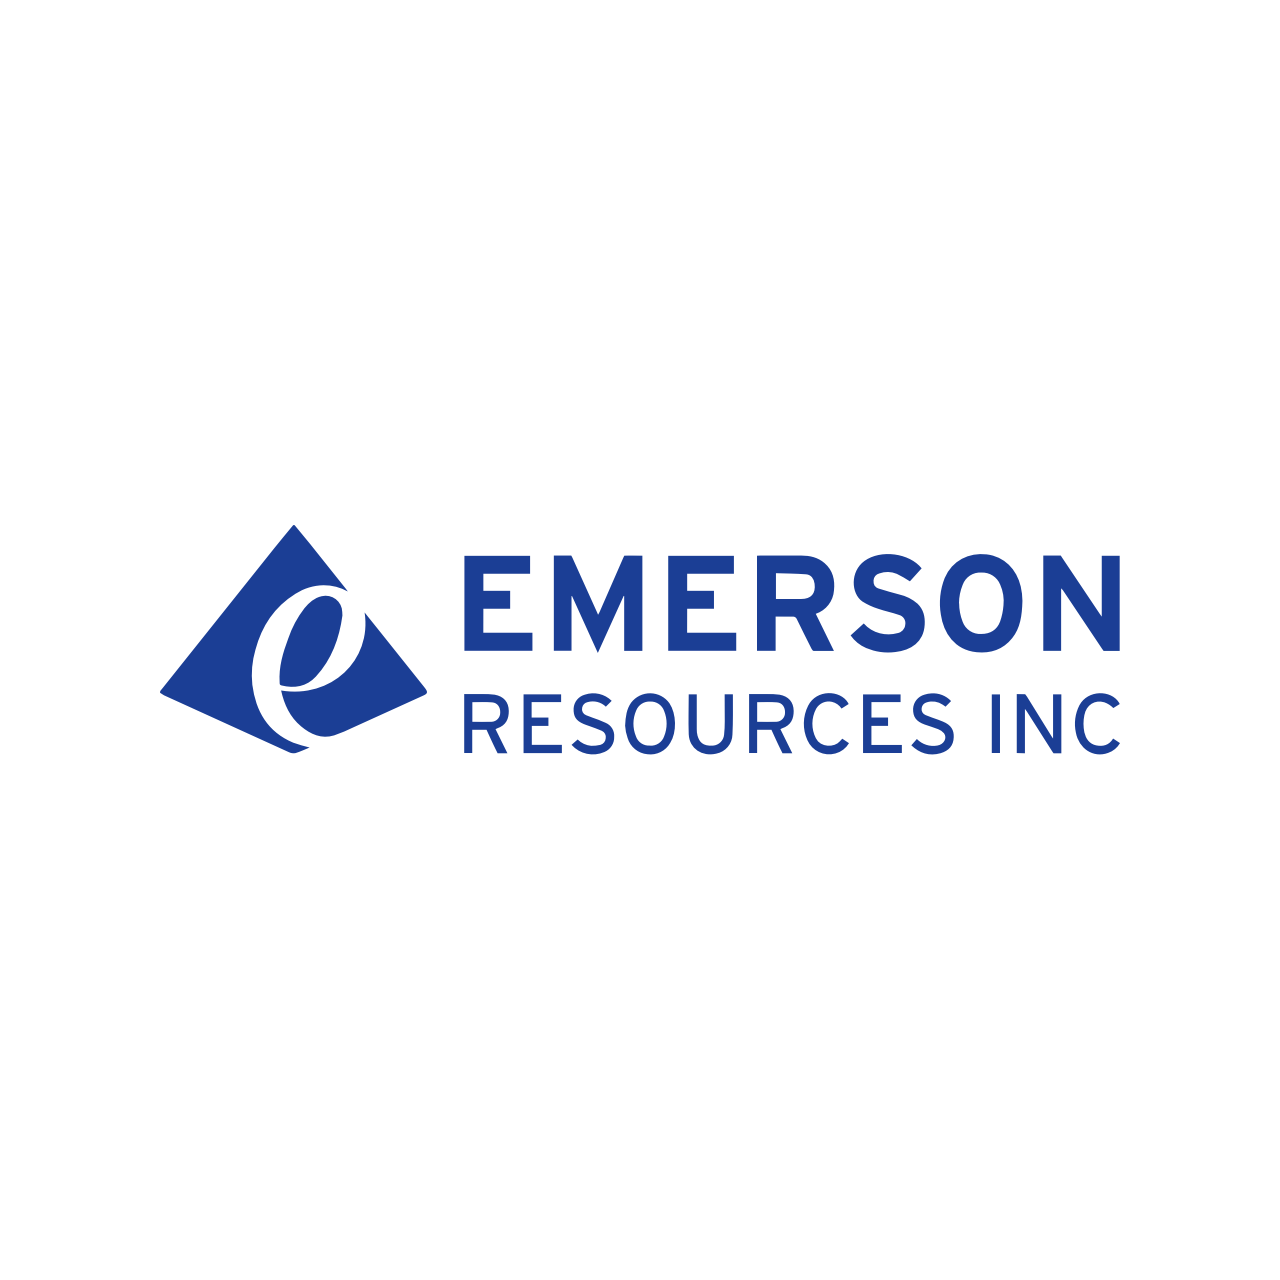 Emerson Resources Inc